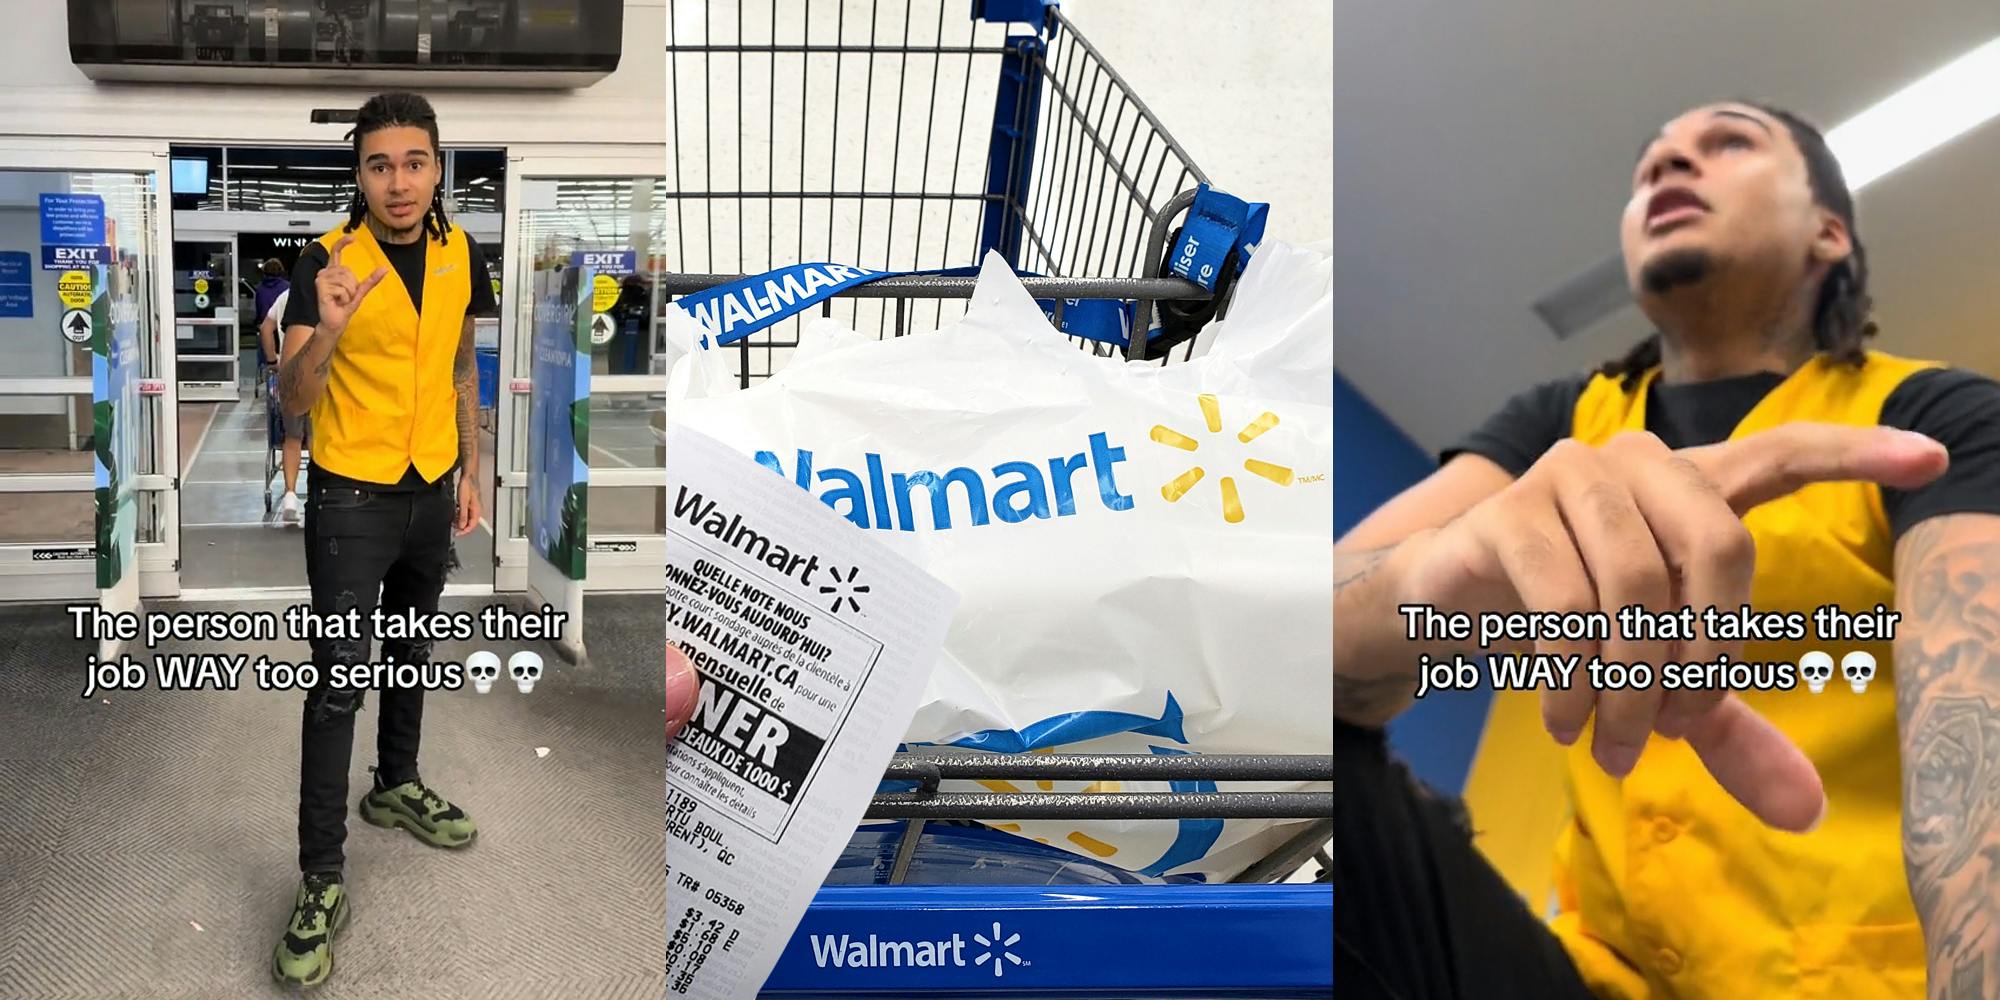 Walmart employee asking for receipt with caption "The person that takes their job WAY too serious" (l) Walmart shopper holding receipt with Walmart bag in cart (c) Walmart employee asking for receipt on top of shopper with caption "The person that takes their job WAY too serious" (r)